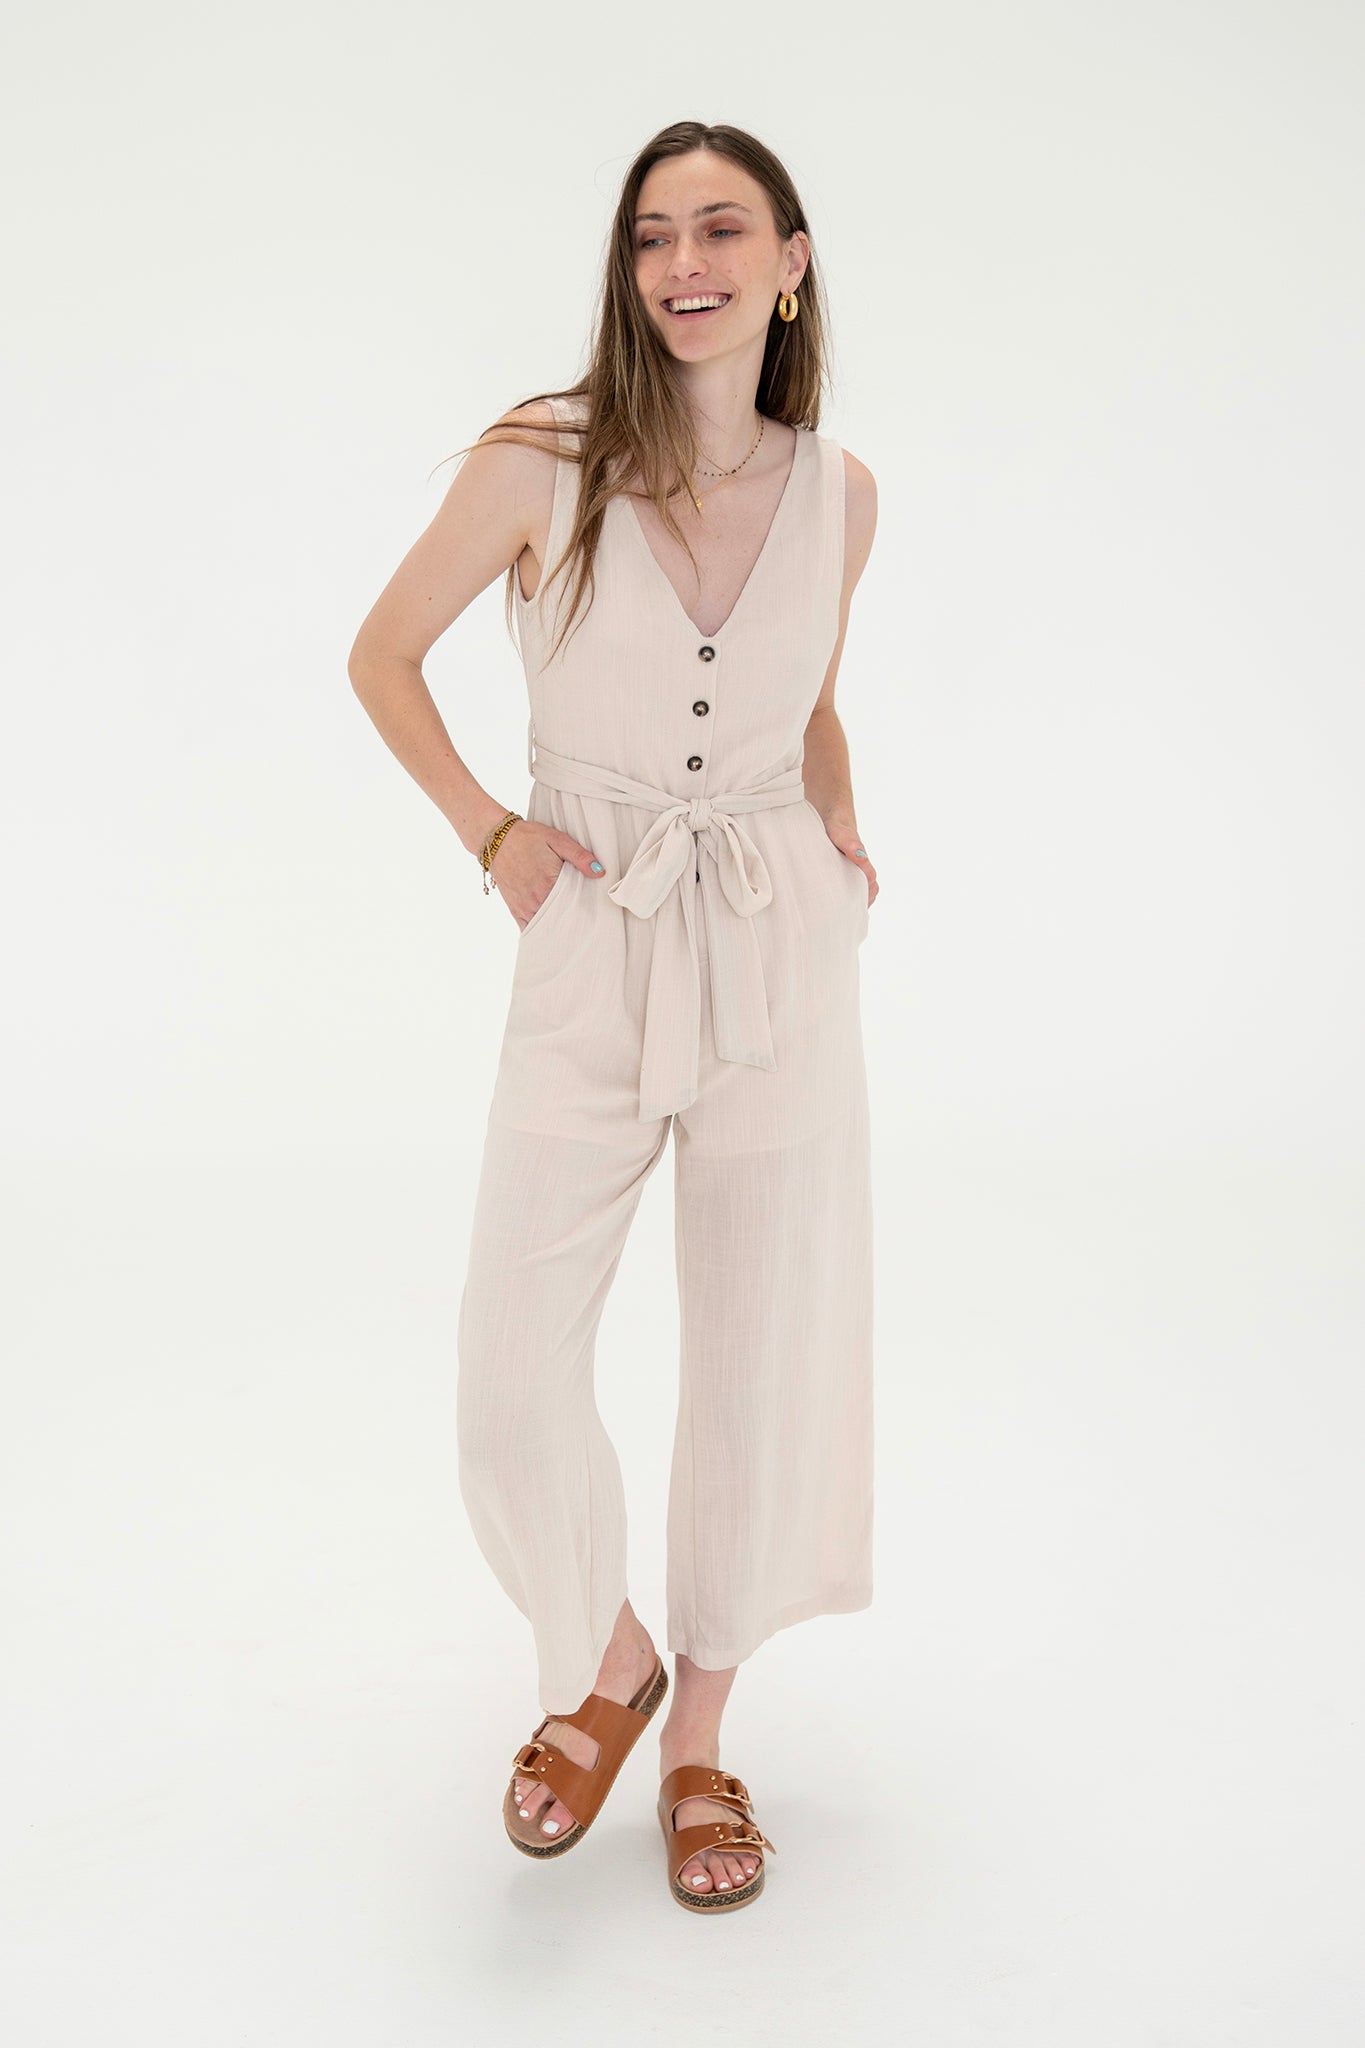 View 1 of Medanos Jumpsuit, a Jumpsuits from Larrea Cove. Detail: For laid-back days when you want to look effo...